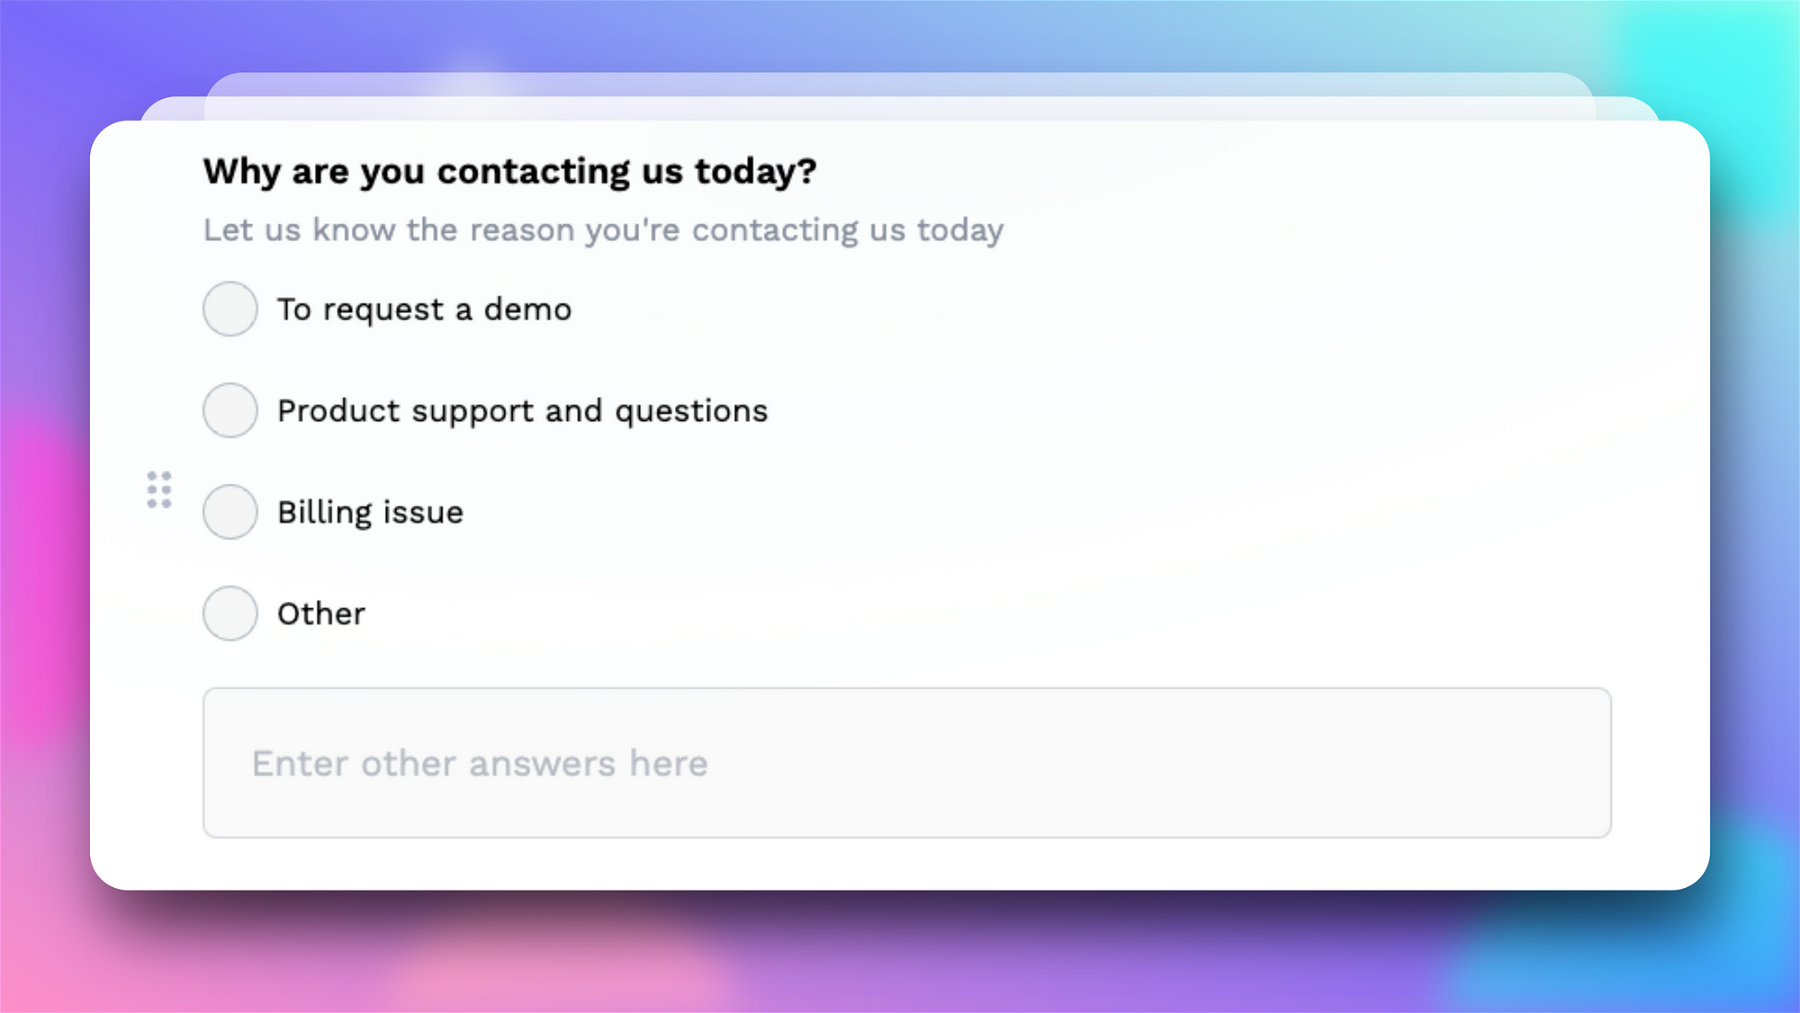 Example of a single select question: “Why are you contacting us today?” You can configure the question/answer options with DeForm, and even add an ‘Other’ option so that responders can fill in their own answer.